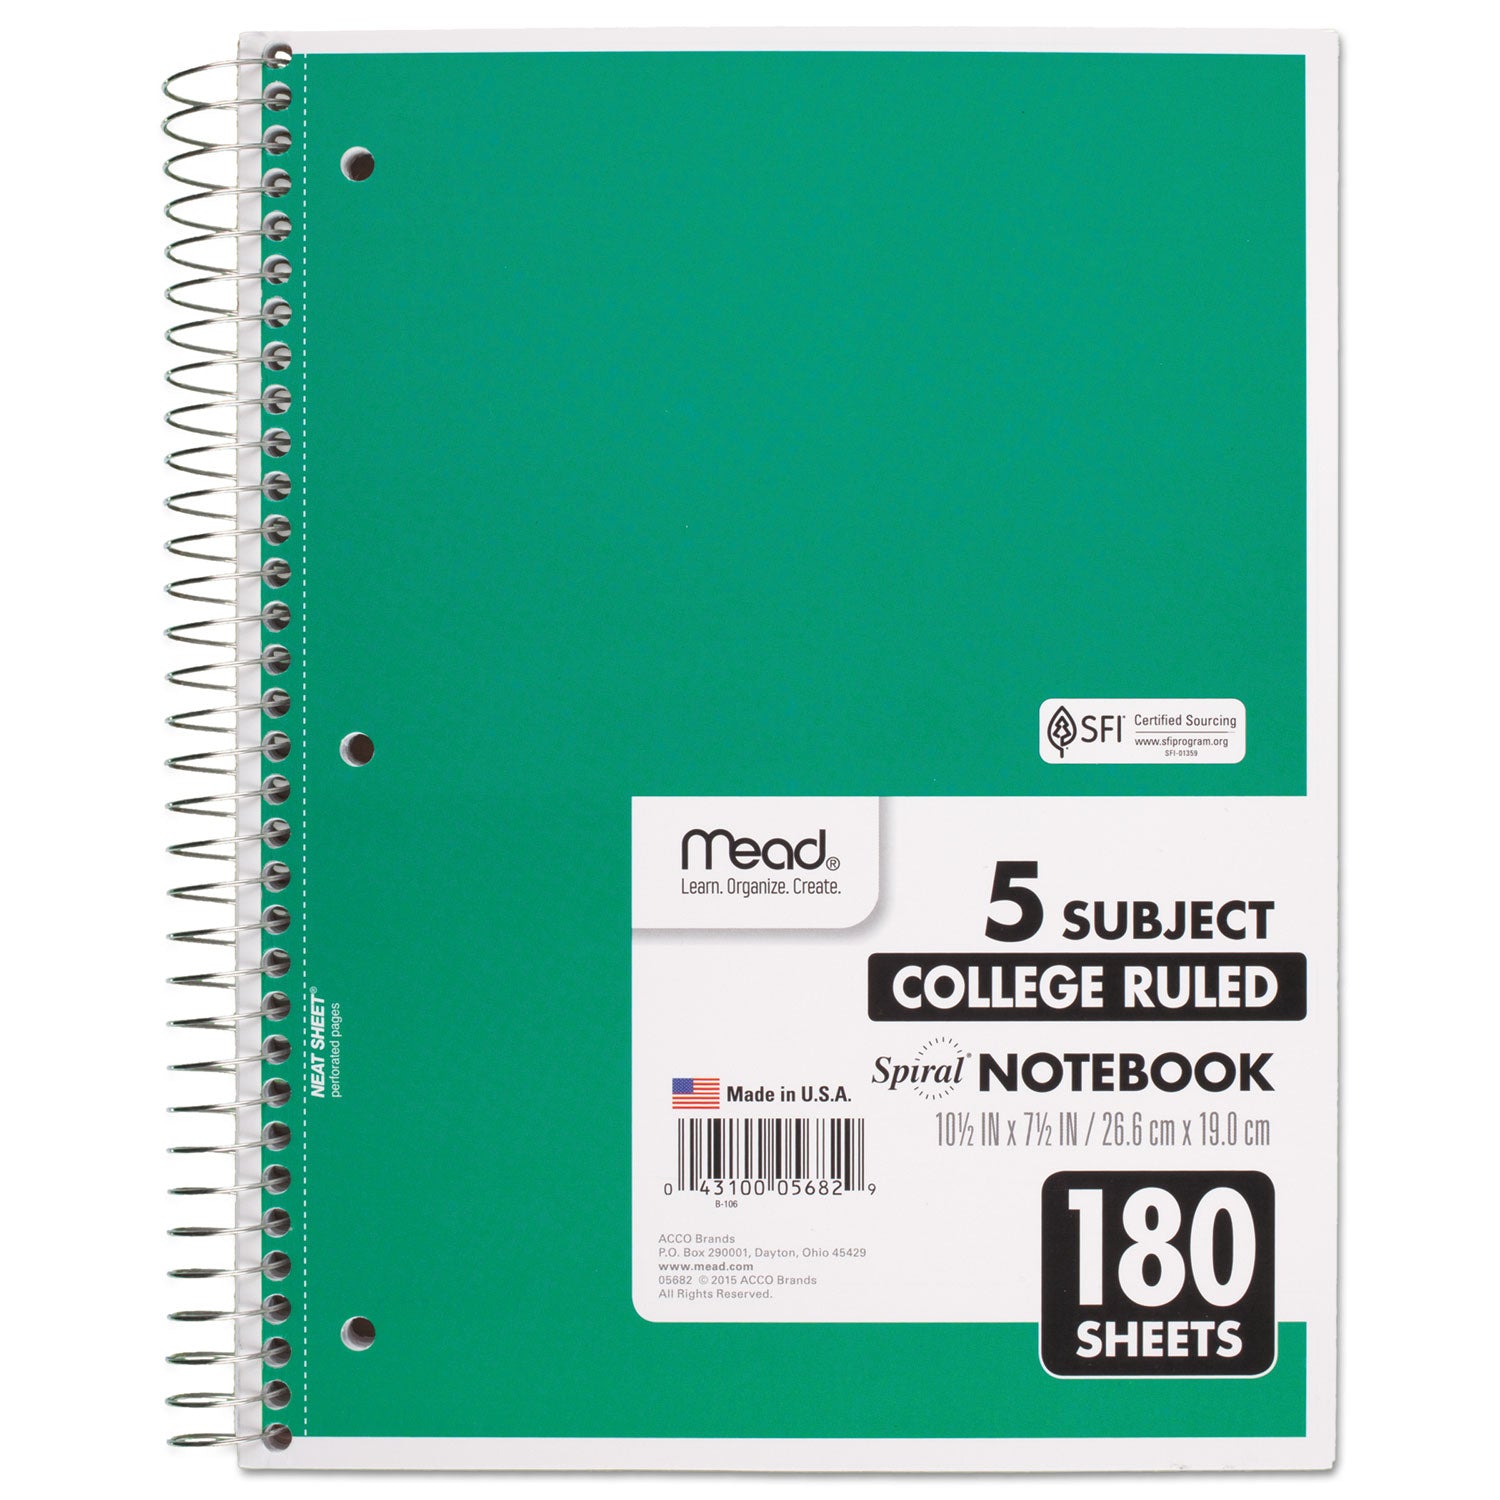 Spiral Notebook, 5-Subject, Medium/College Rule, Randomly Assorted Cover Color, (180) 10.5 x 8 Sheets - 